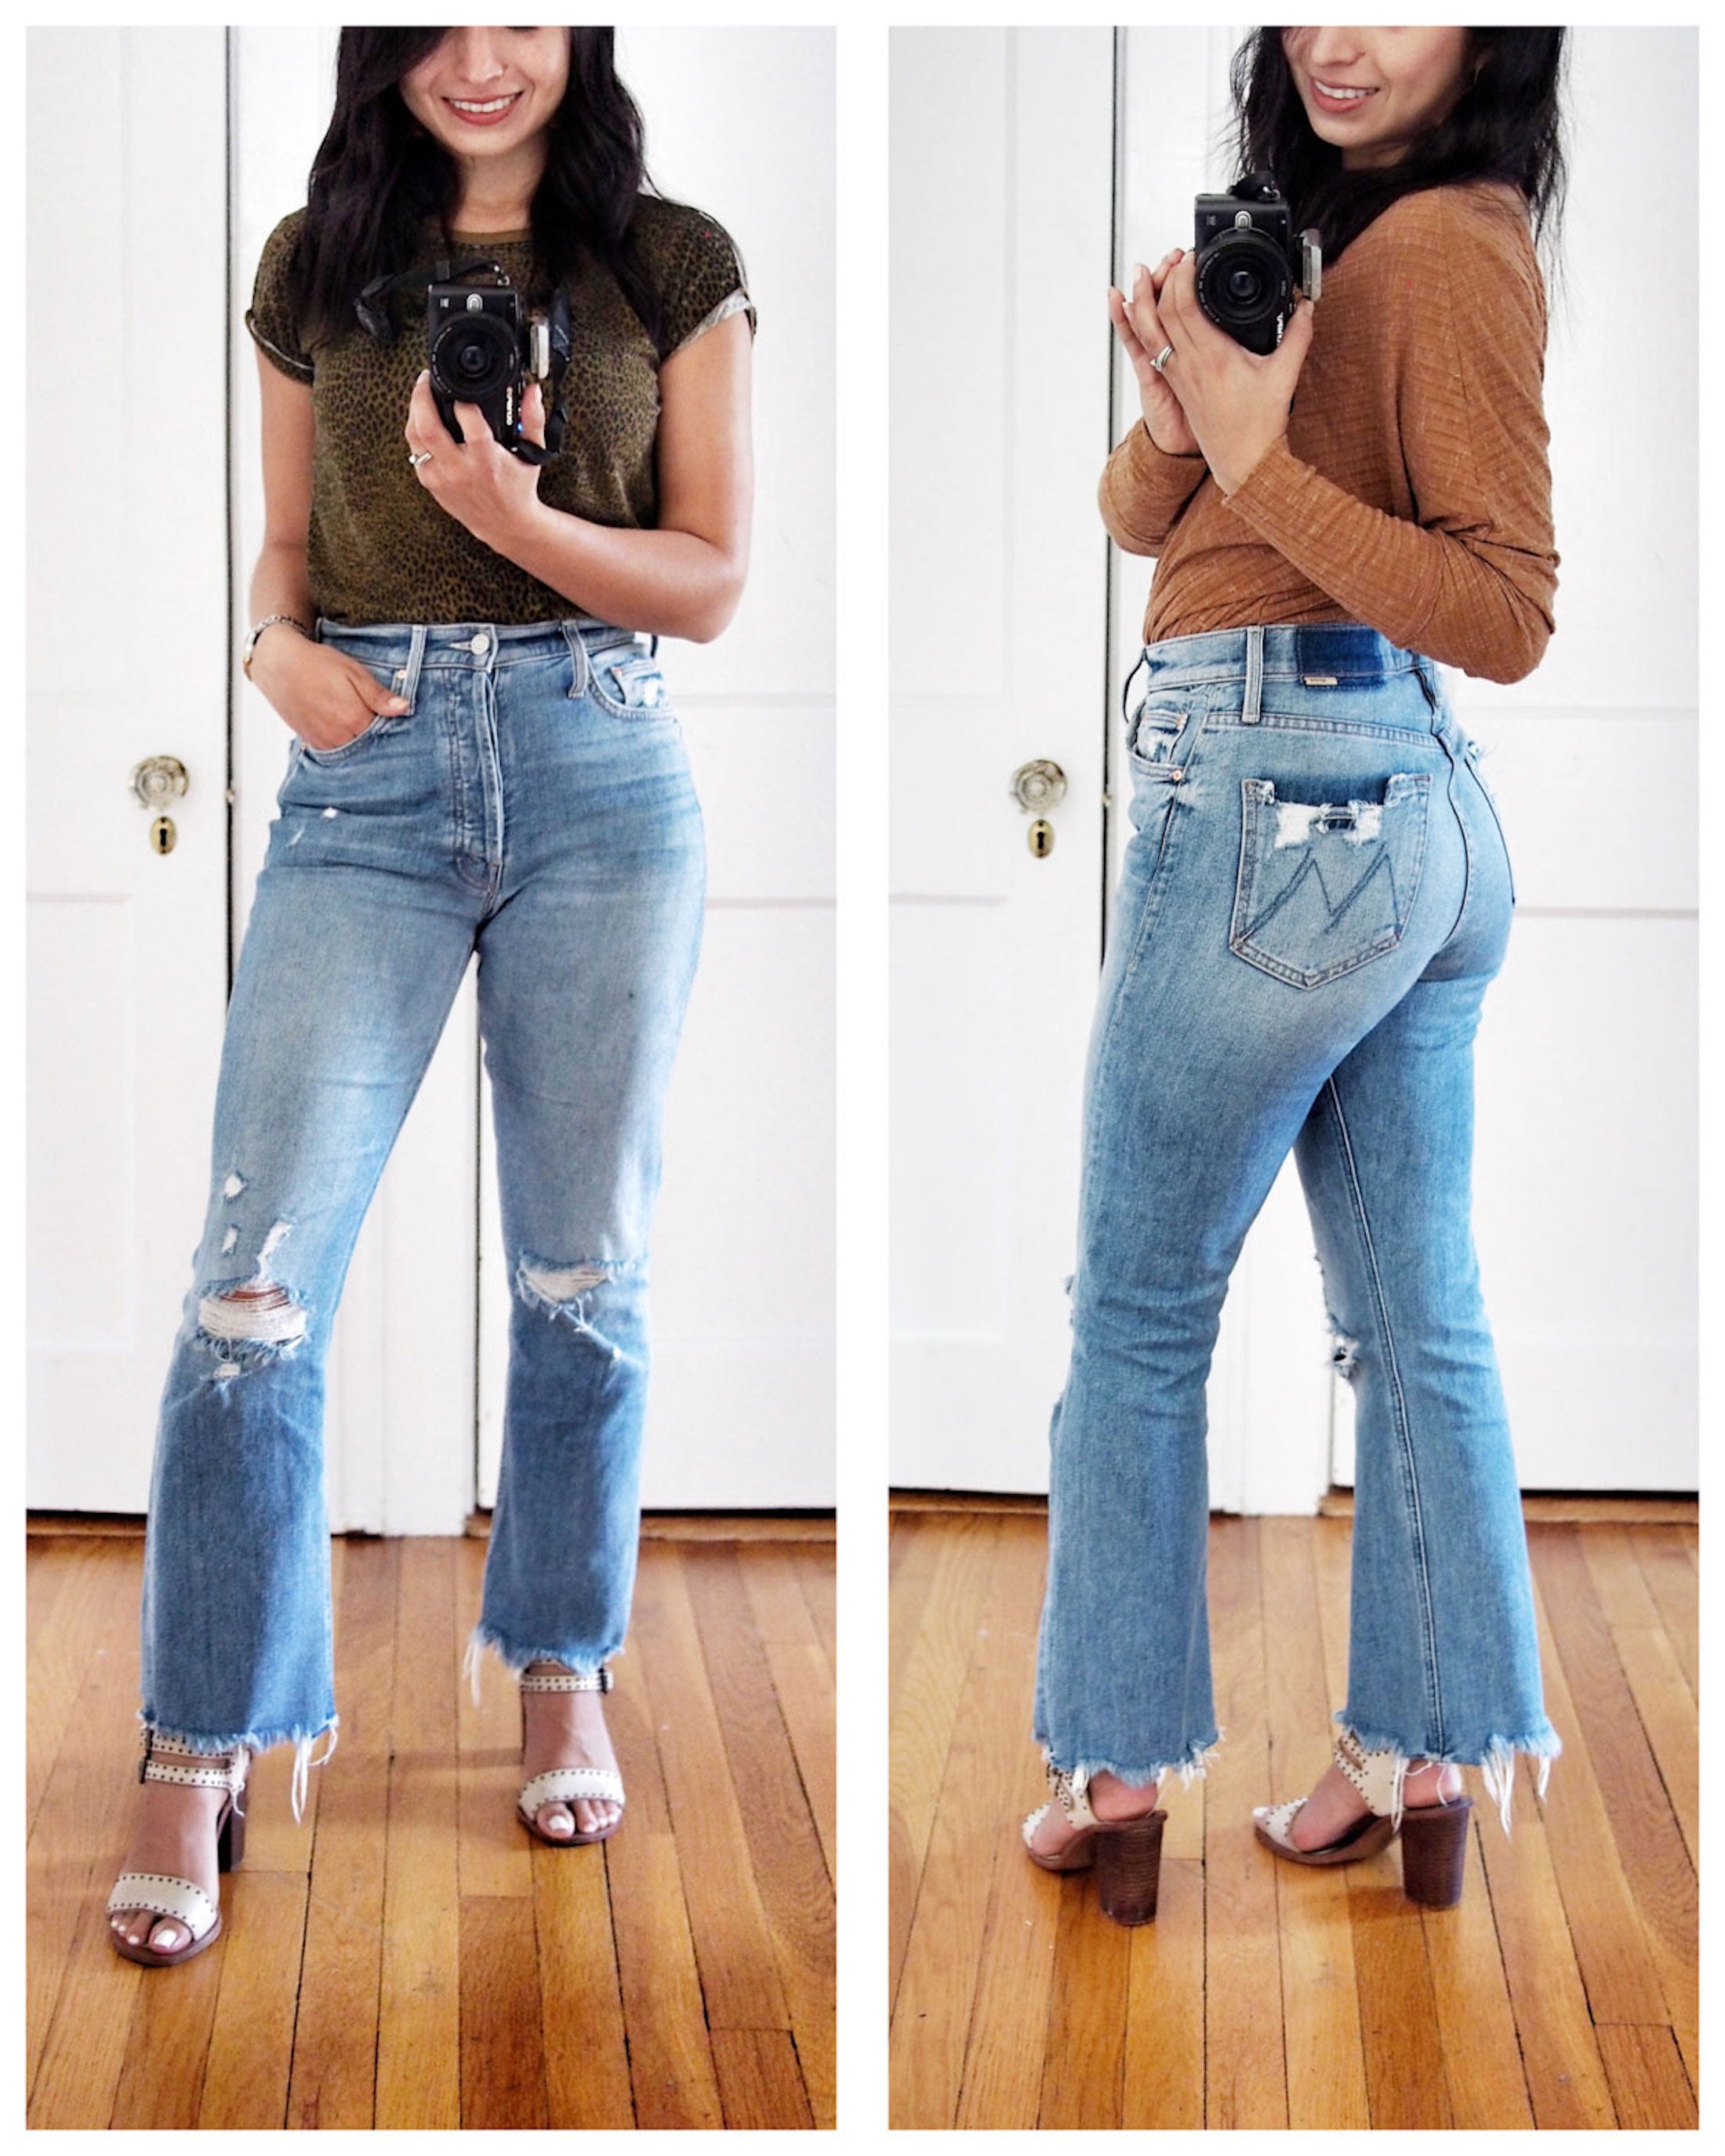 How To Cut Flare Jeans That Are Too Long?